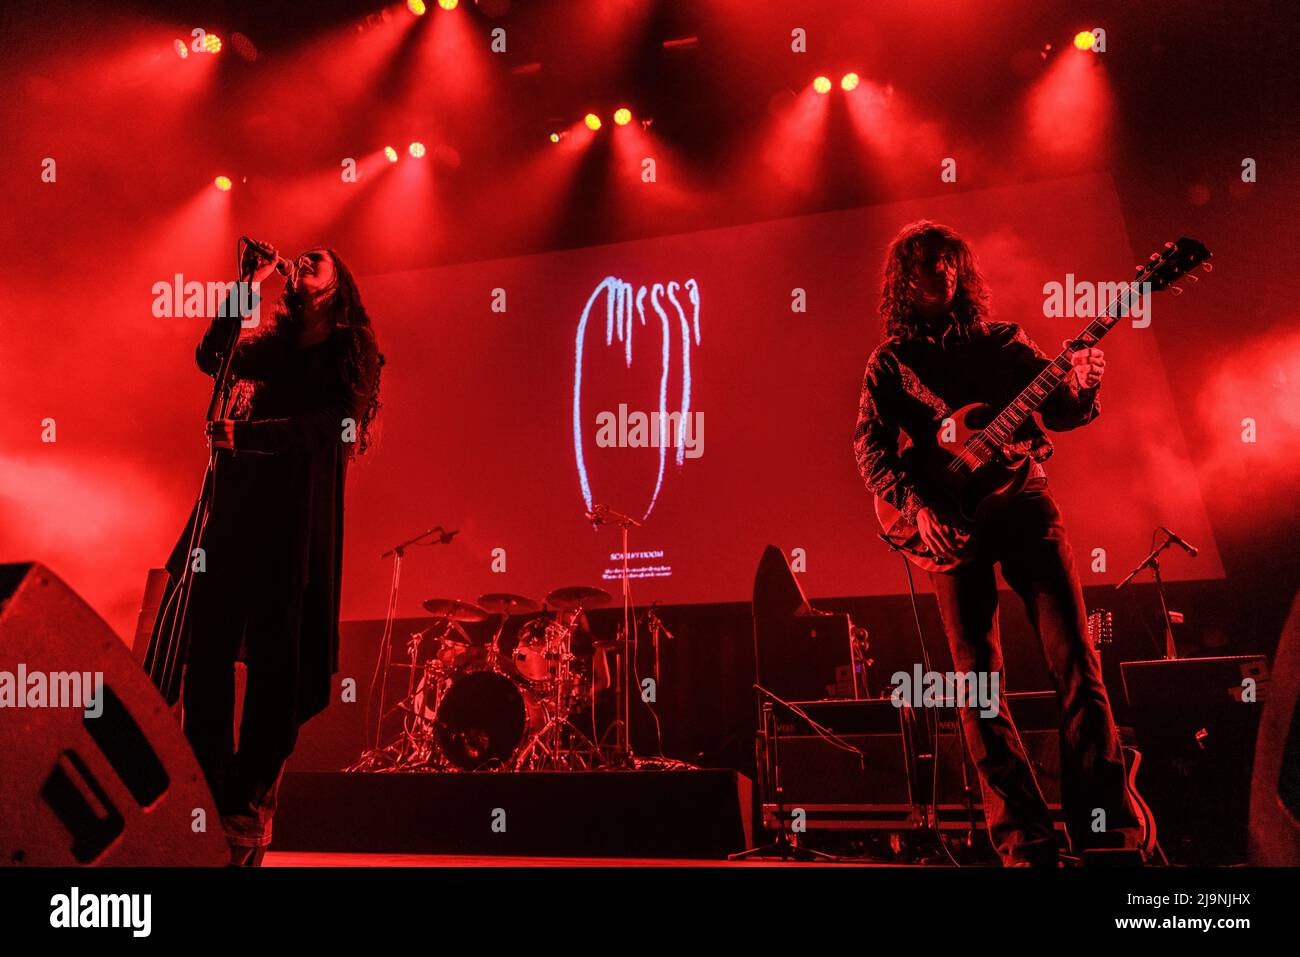 Tilburg, Netherlands. 21st, April 2022. The Italian doom metal band Messa performs a live concert during the Dutch music festival Roadburn Festival 2022 in Tilburg. Here vocalist Sara B is seen live on stage with guitarist Alberto Piccolo. (Photo credit: Gonzales Photo - Peter Troest). Stock Photo